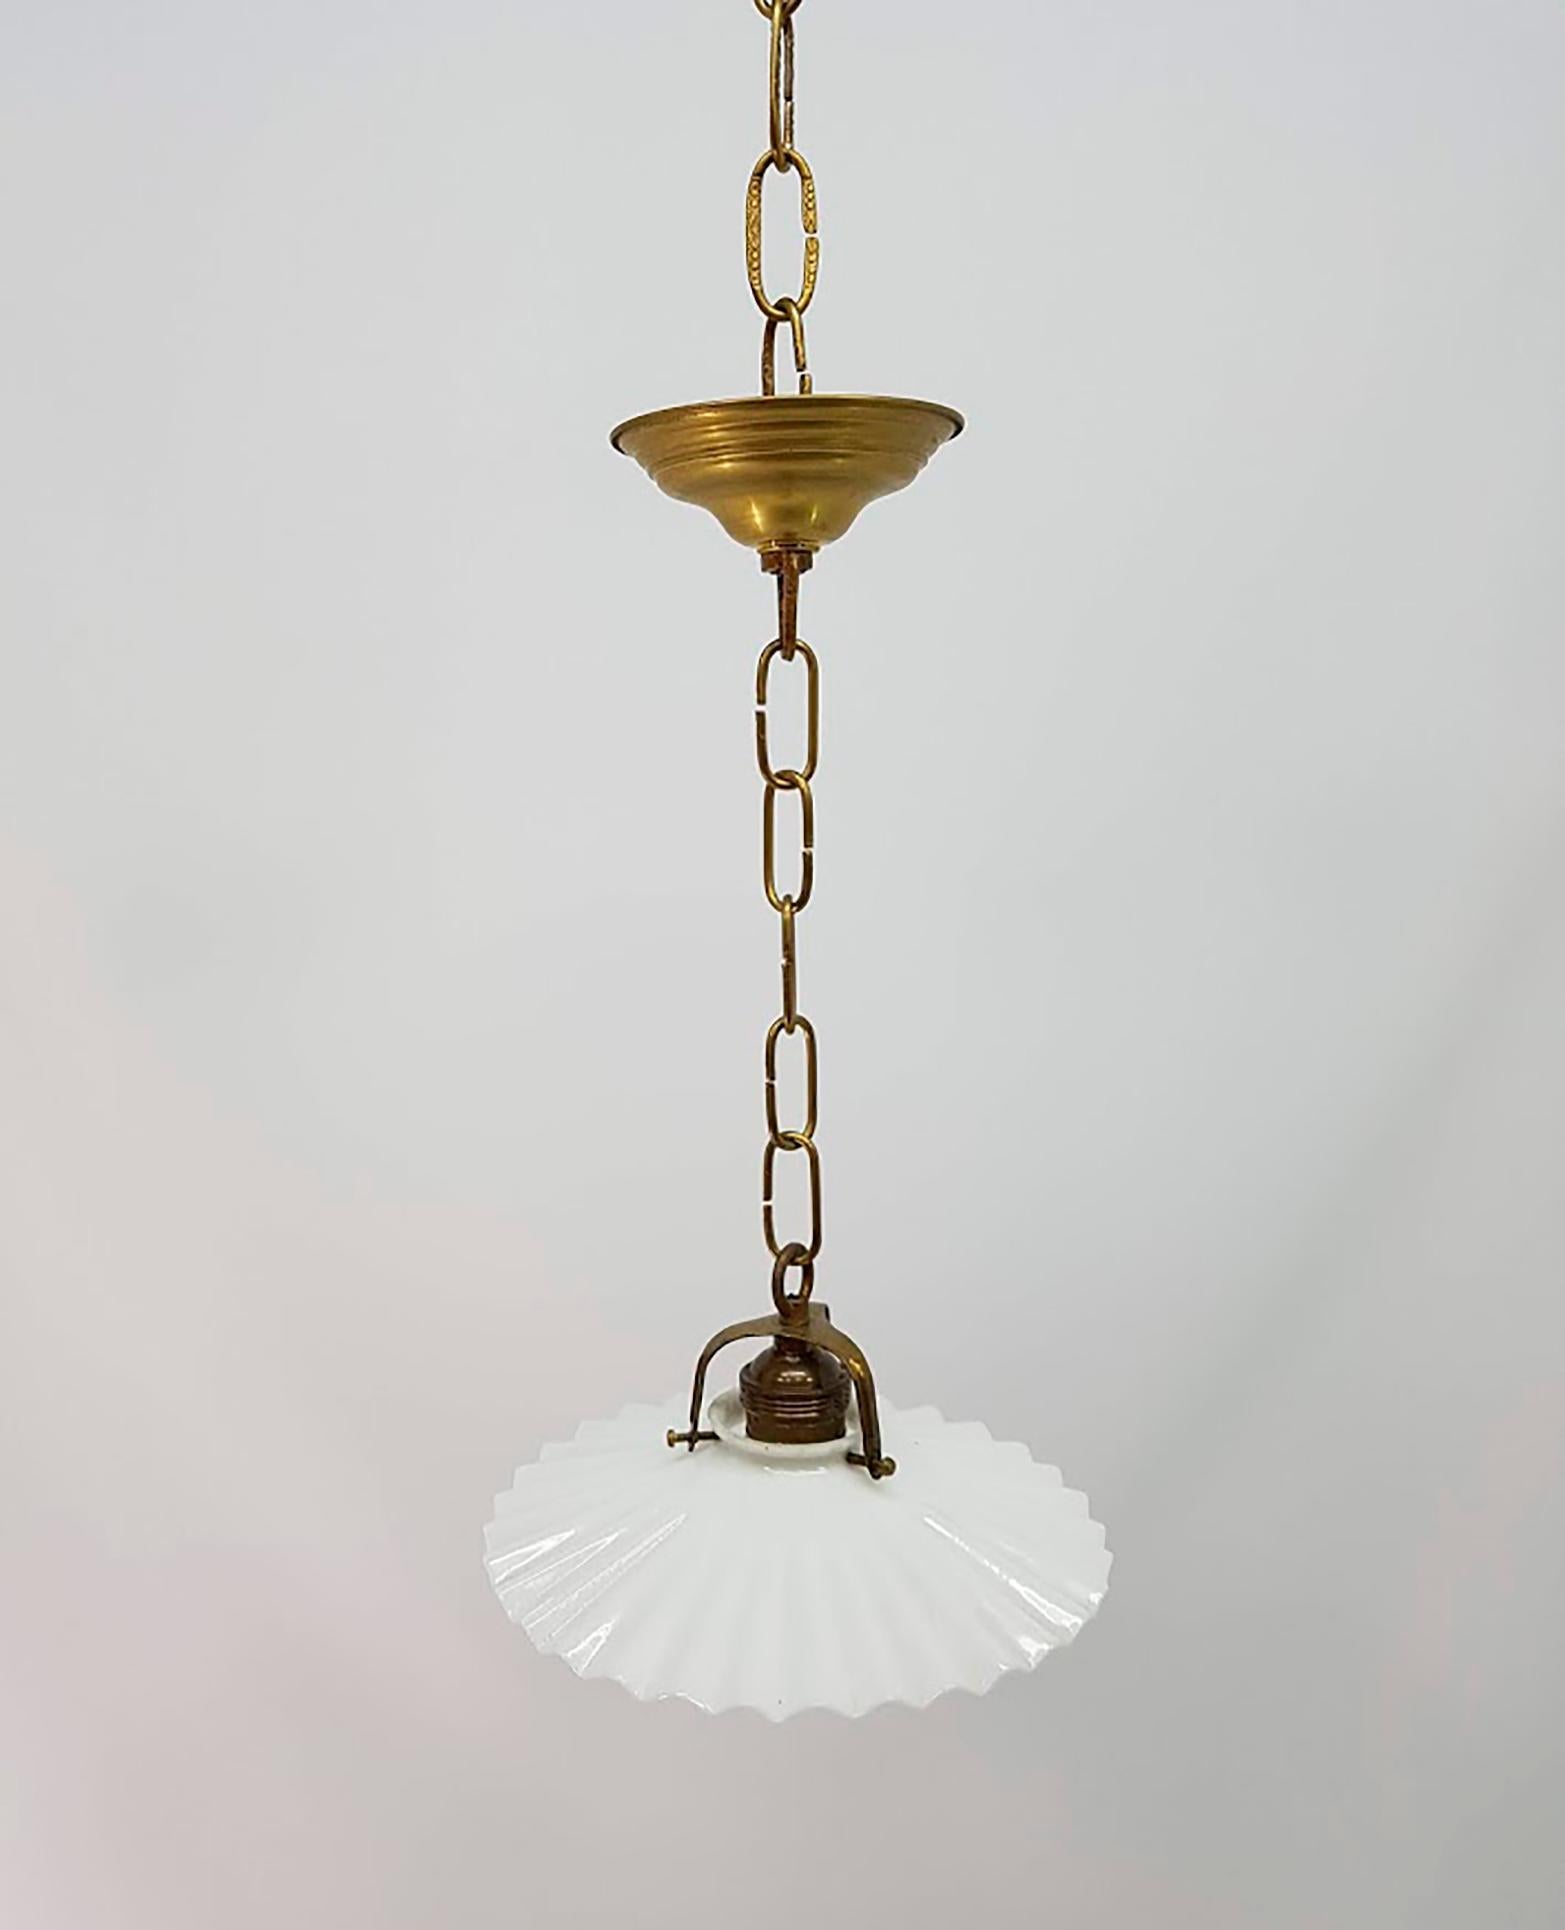 Brass pendant with opal tulip in the shape of a fluted plate.
Classical tulip of modernist style that was used to illuminate small rooms. Antiqued glass
completely restored and with new electrical installation.